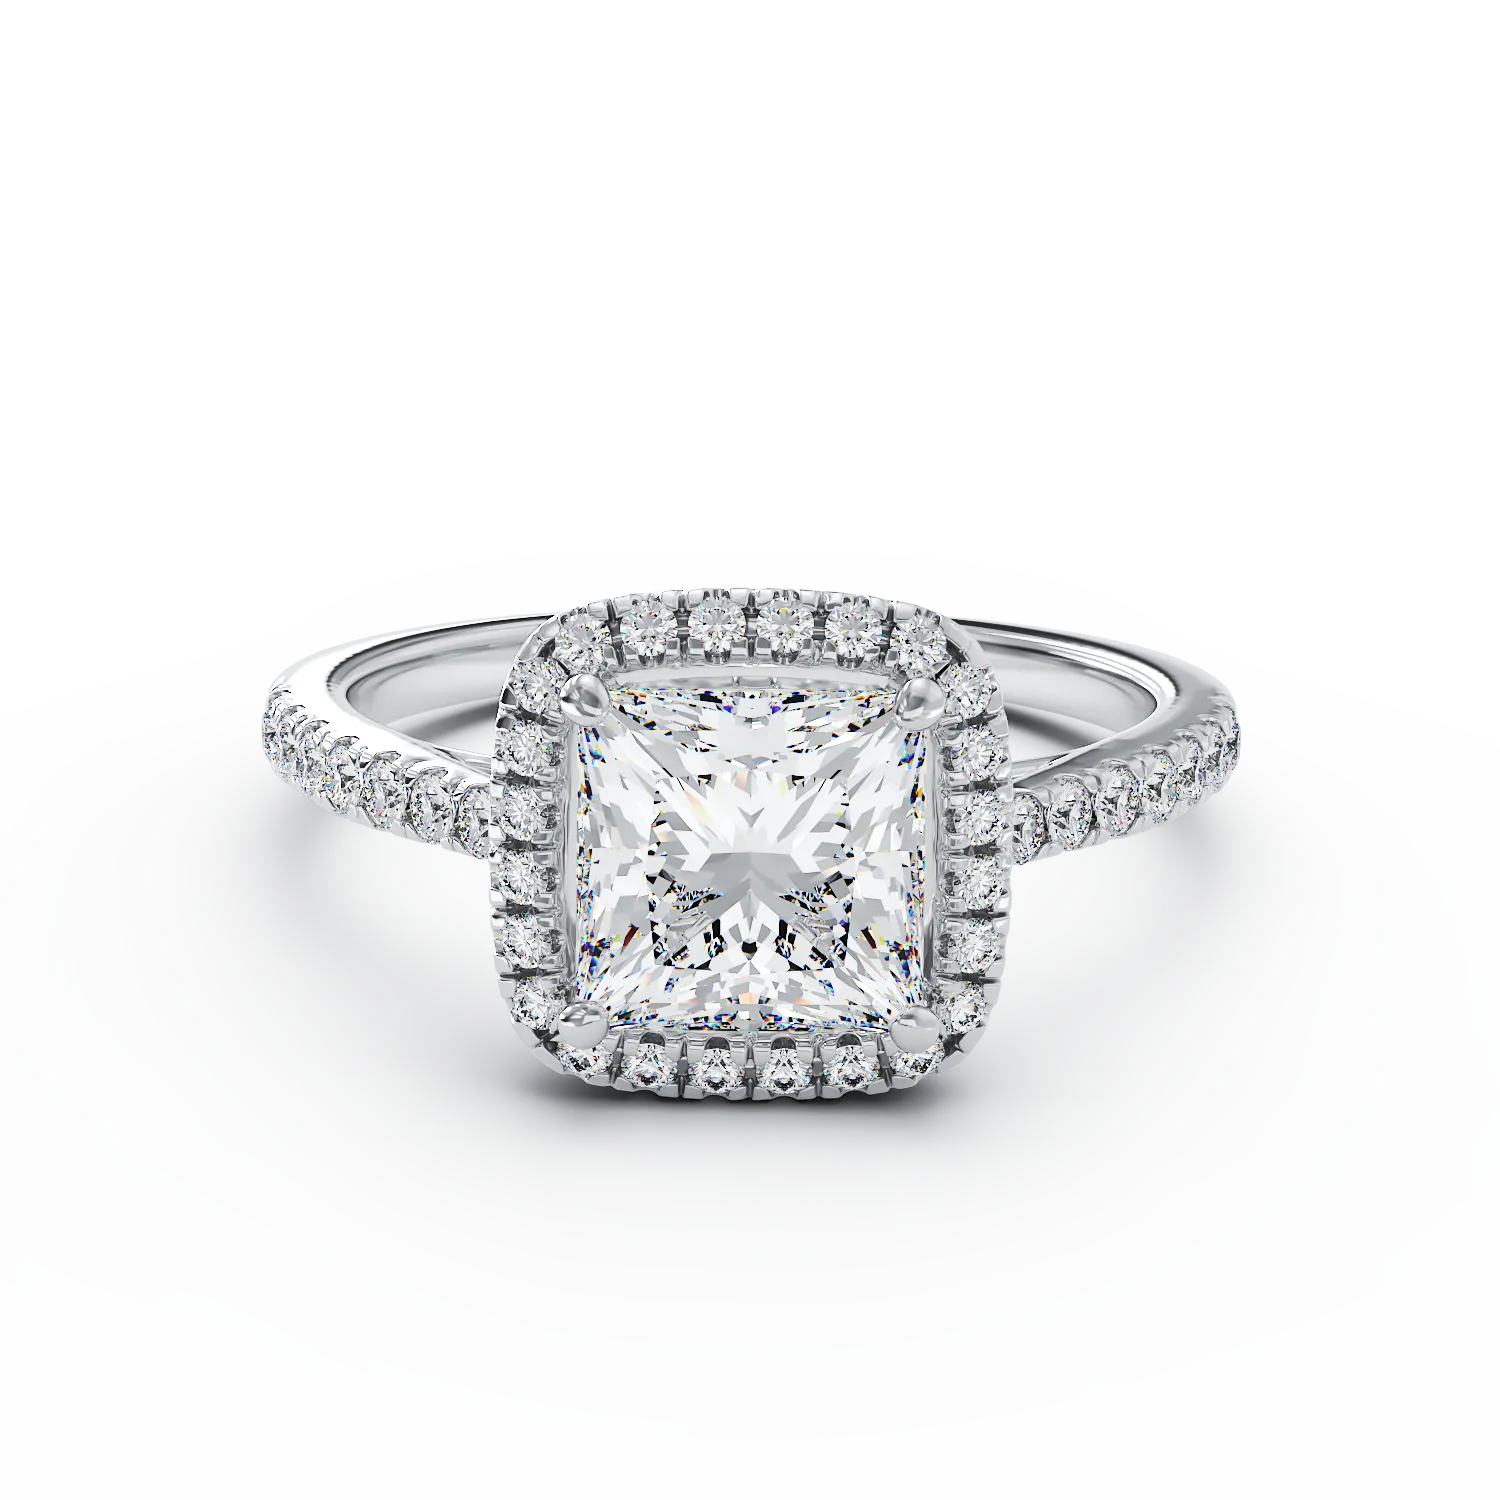 18K white gold engagement ring with 2.02ct diamond and 0.37ct diamonds